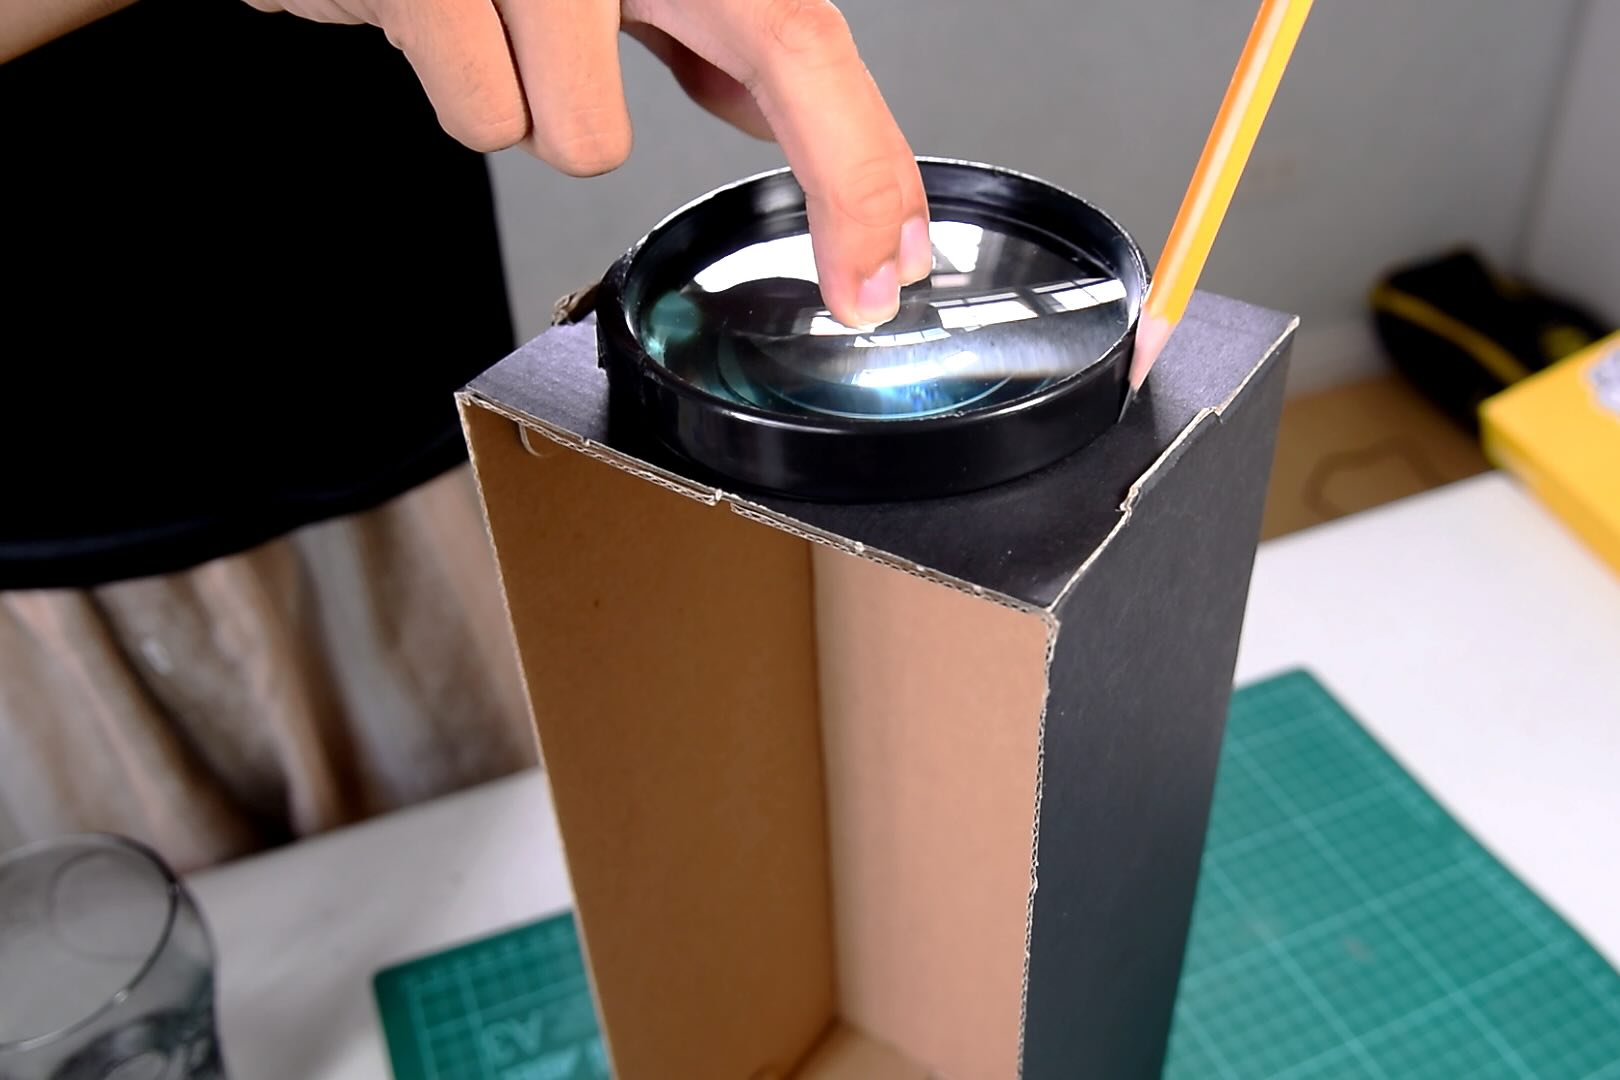 How To Make A Projector With A Glass Cup